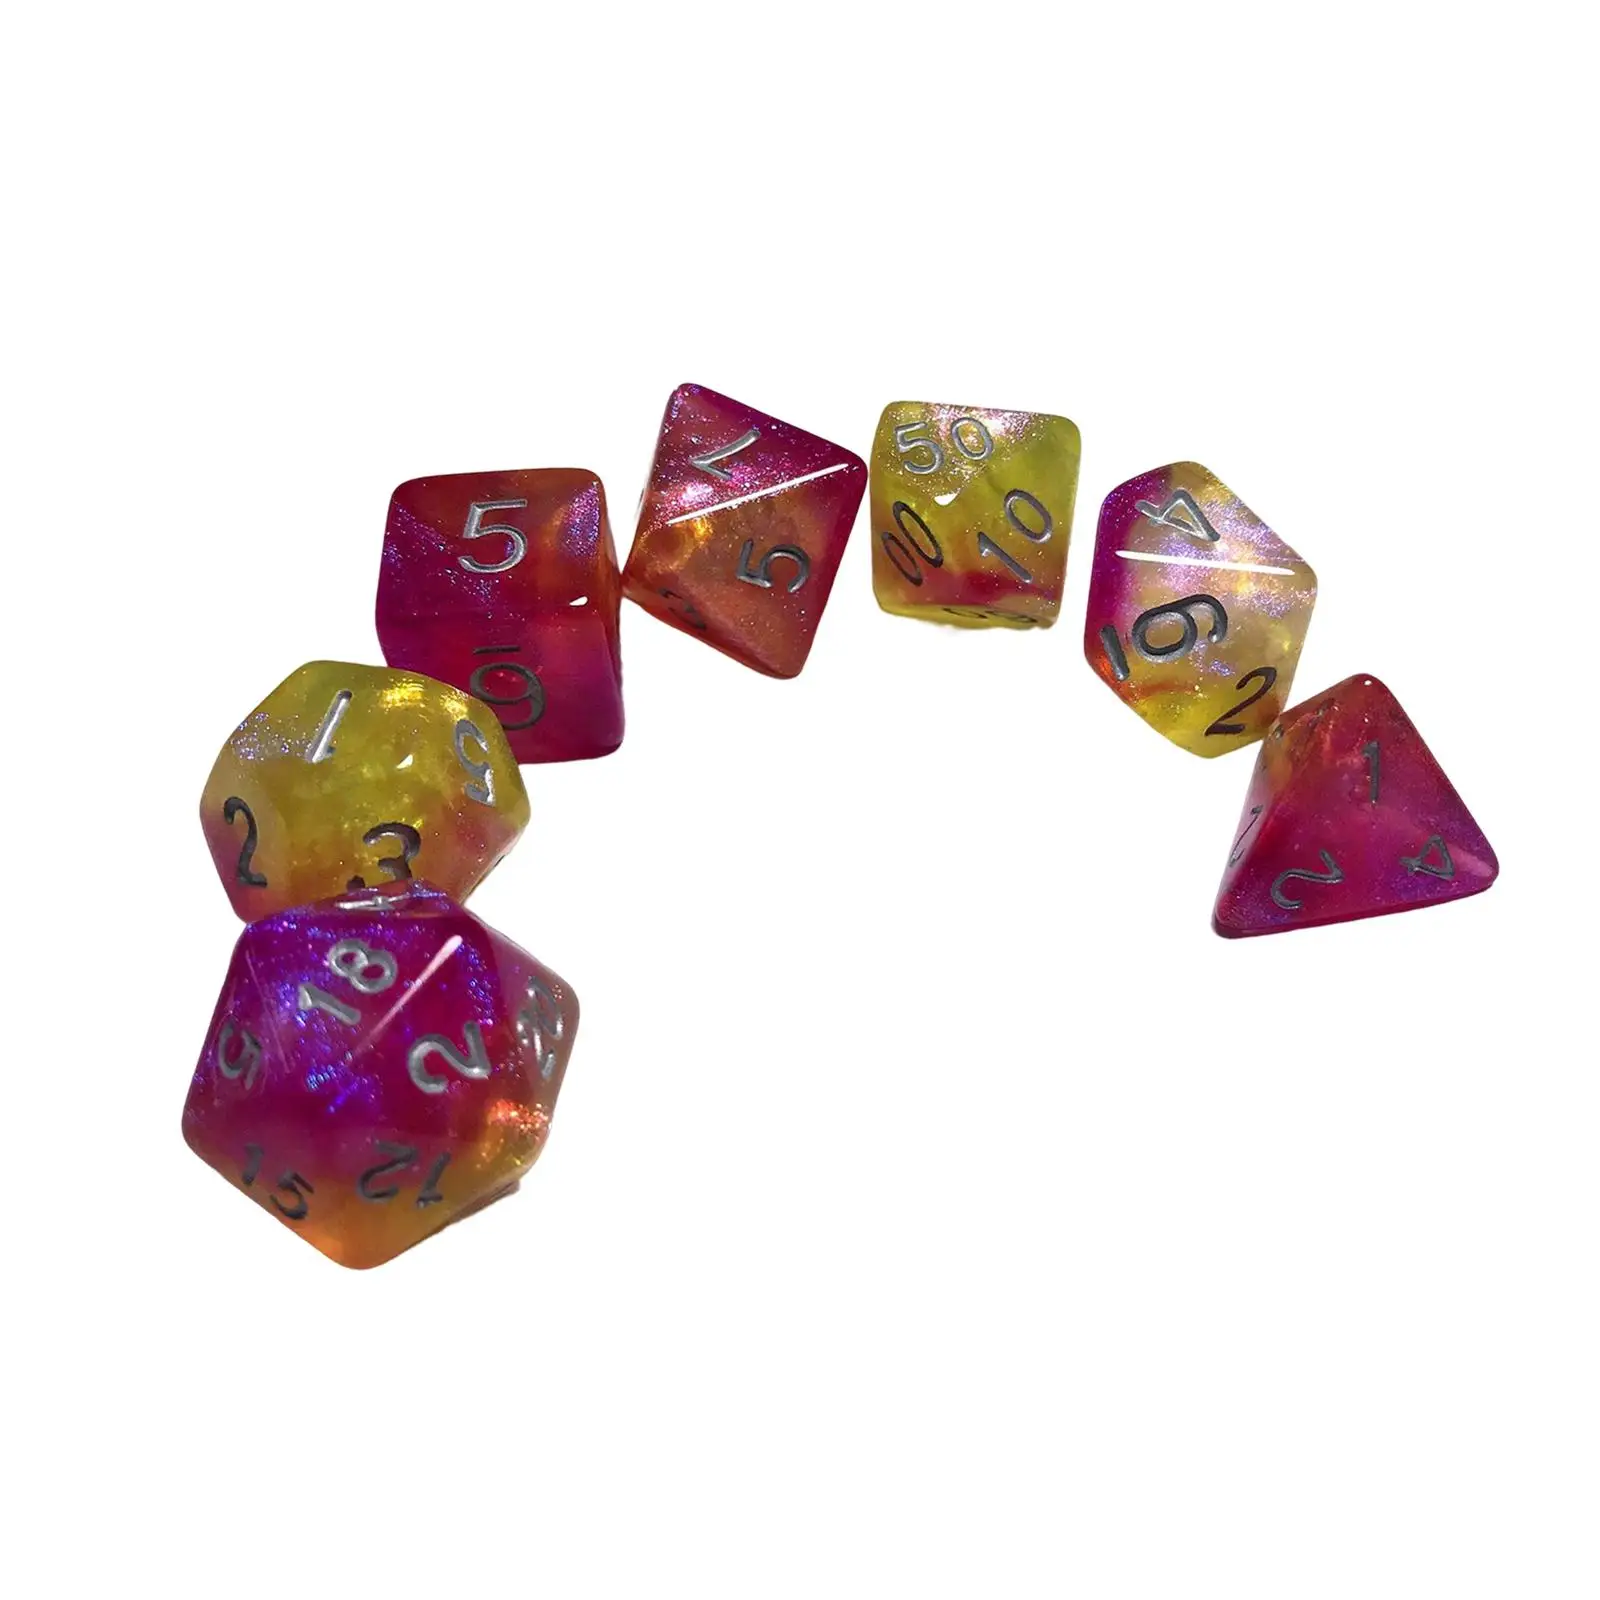 Acrylic Multi Sided Dices for Entertainment Math Party Supplies